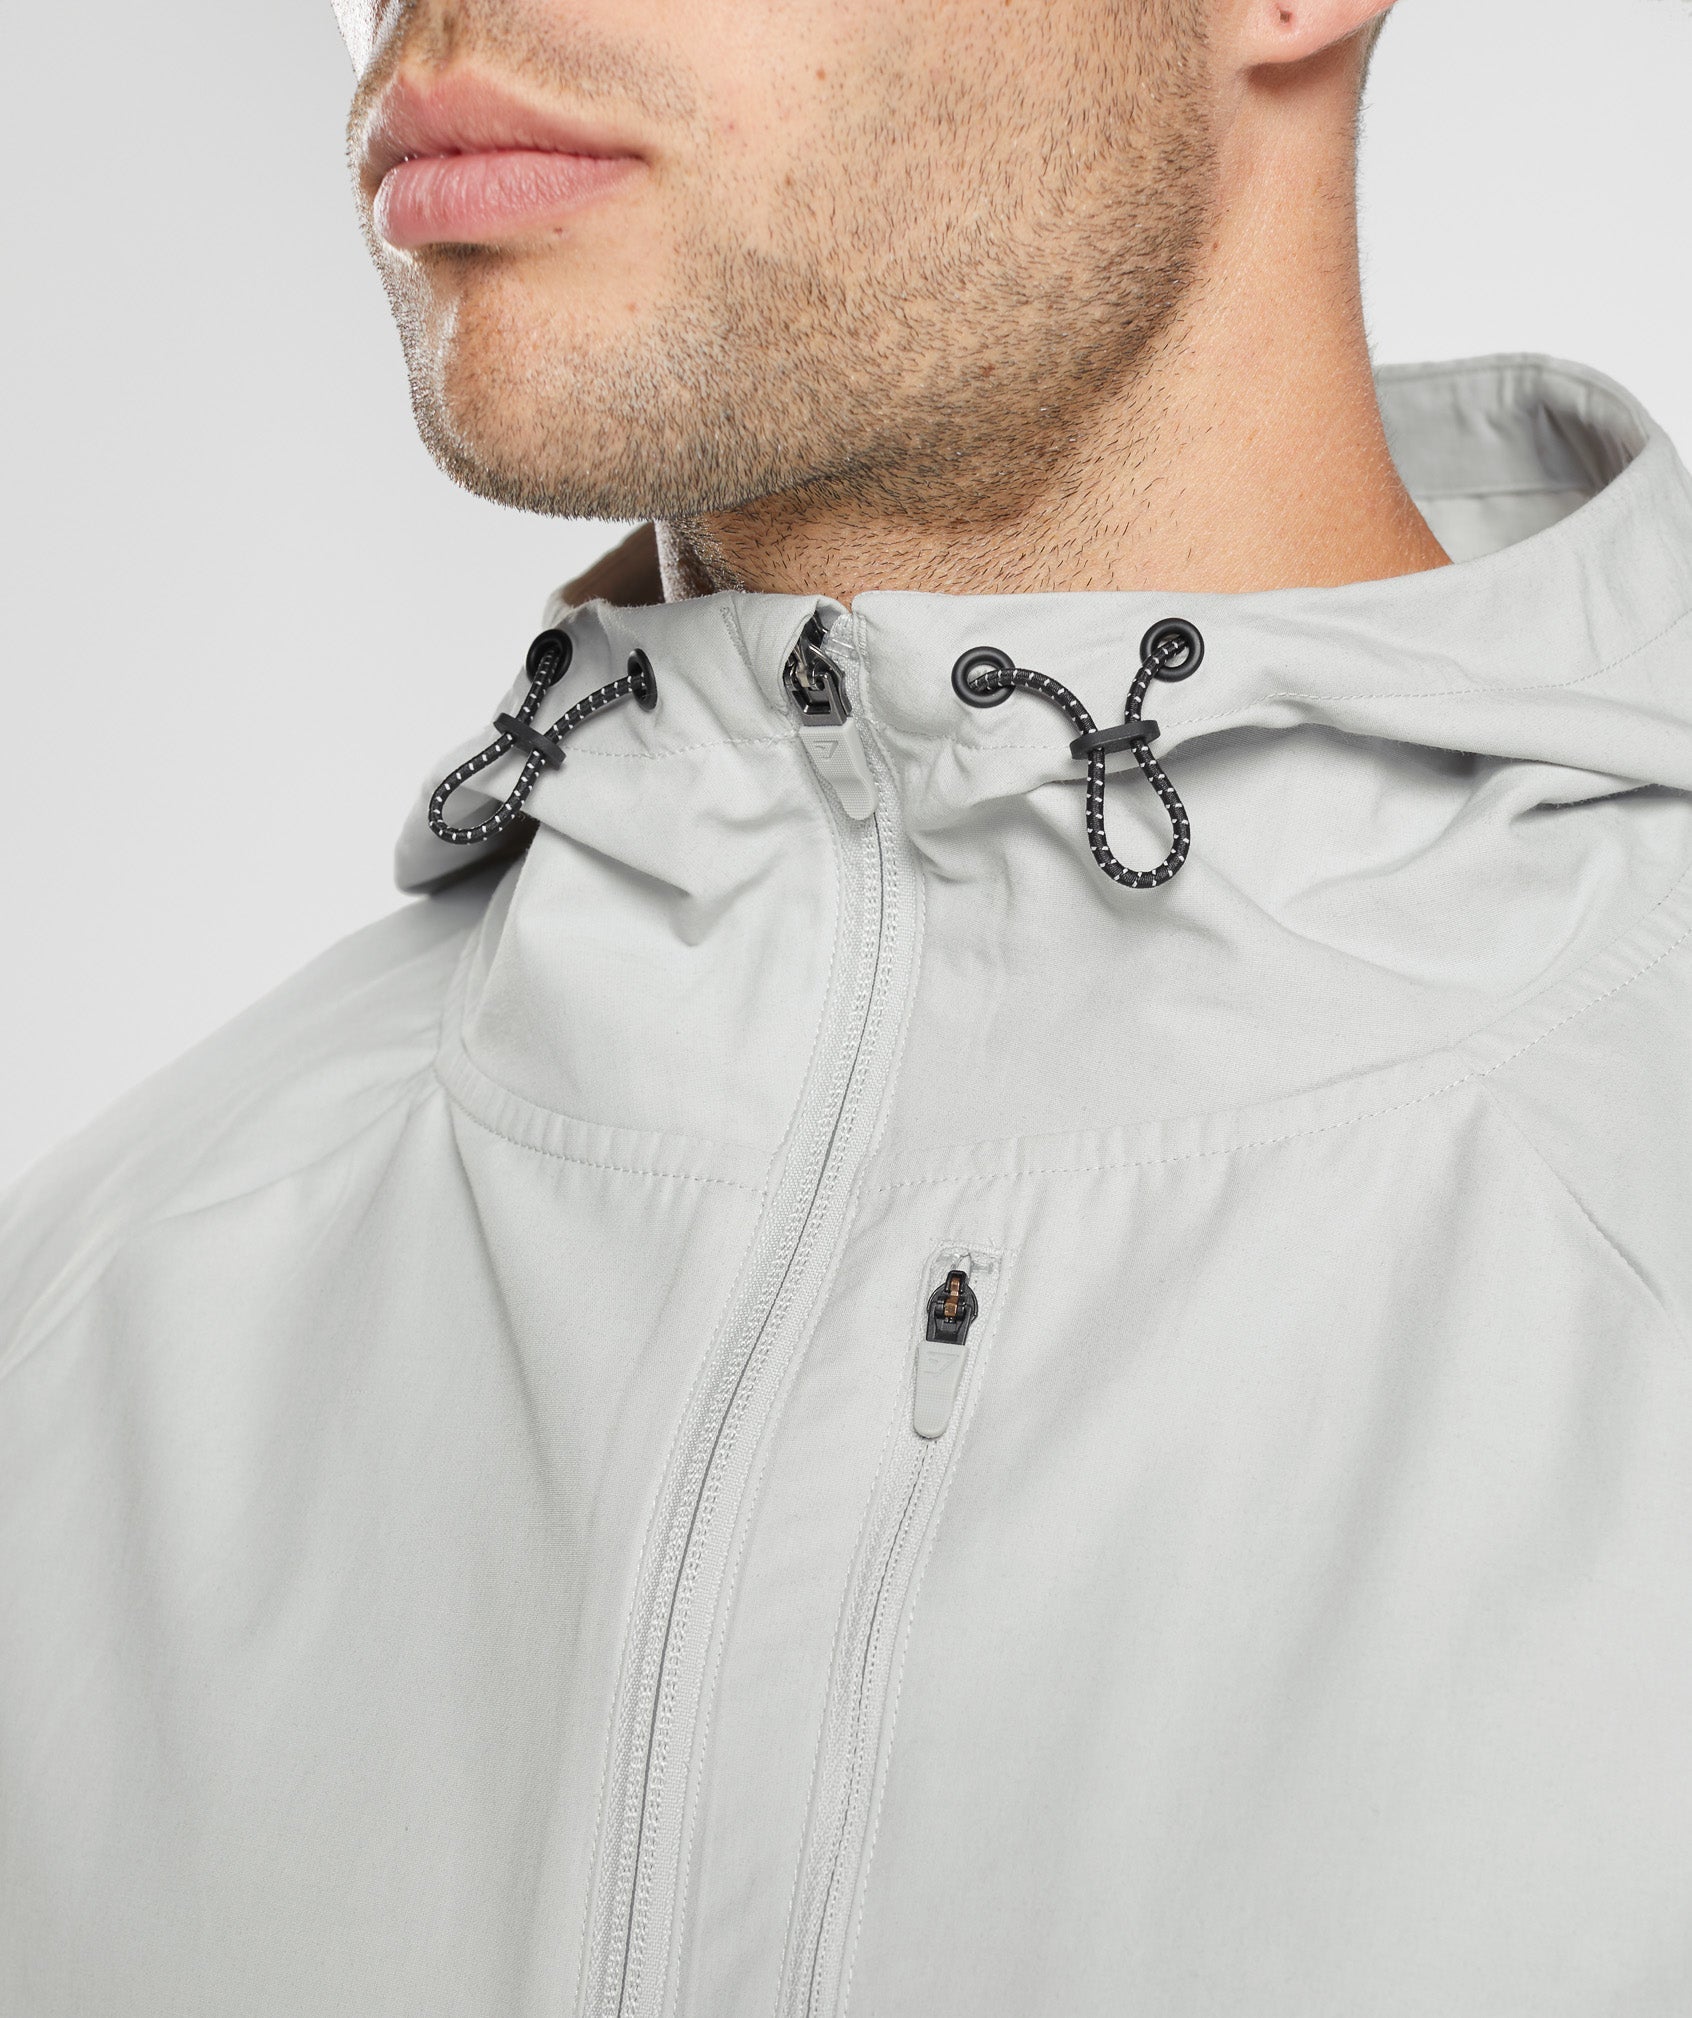 Apex Jacket in Light Grey - view 5